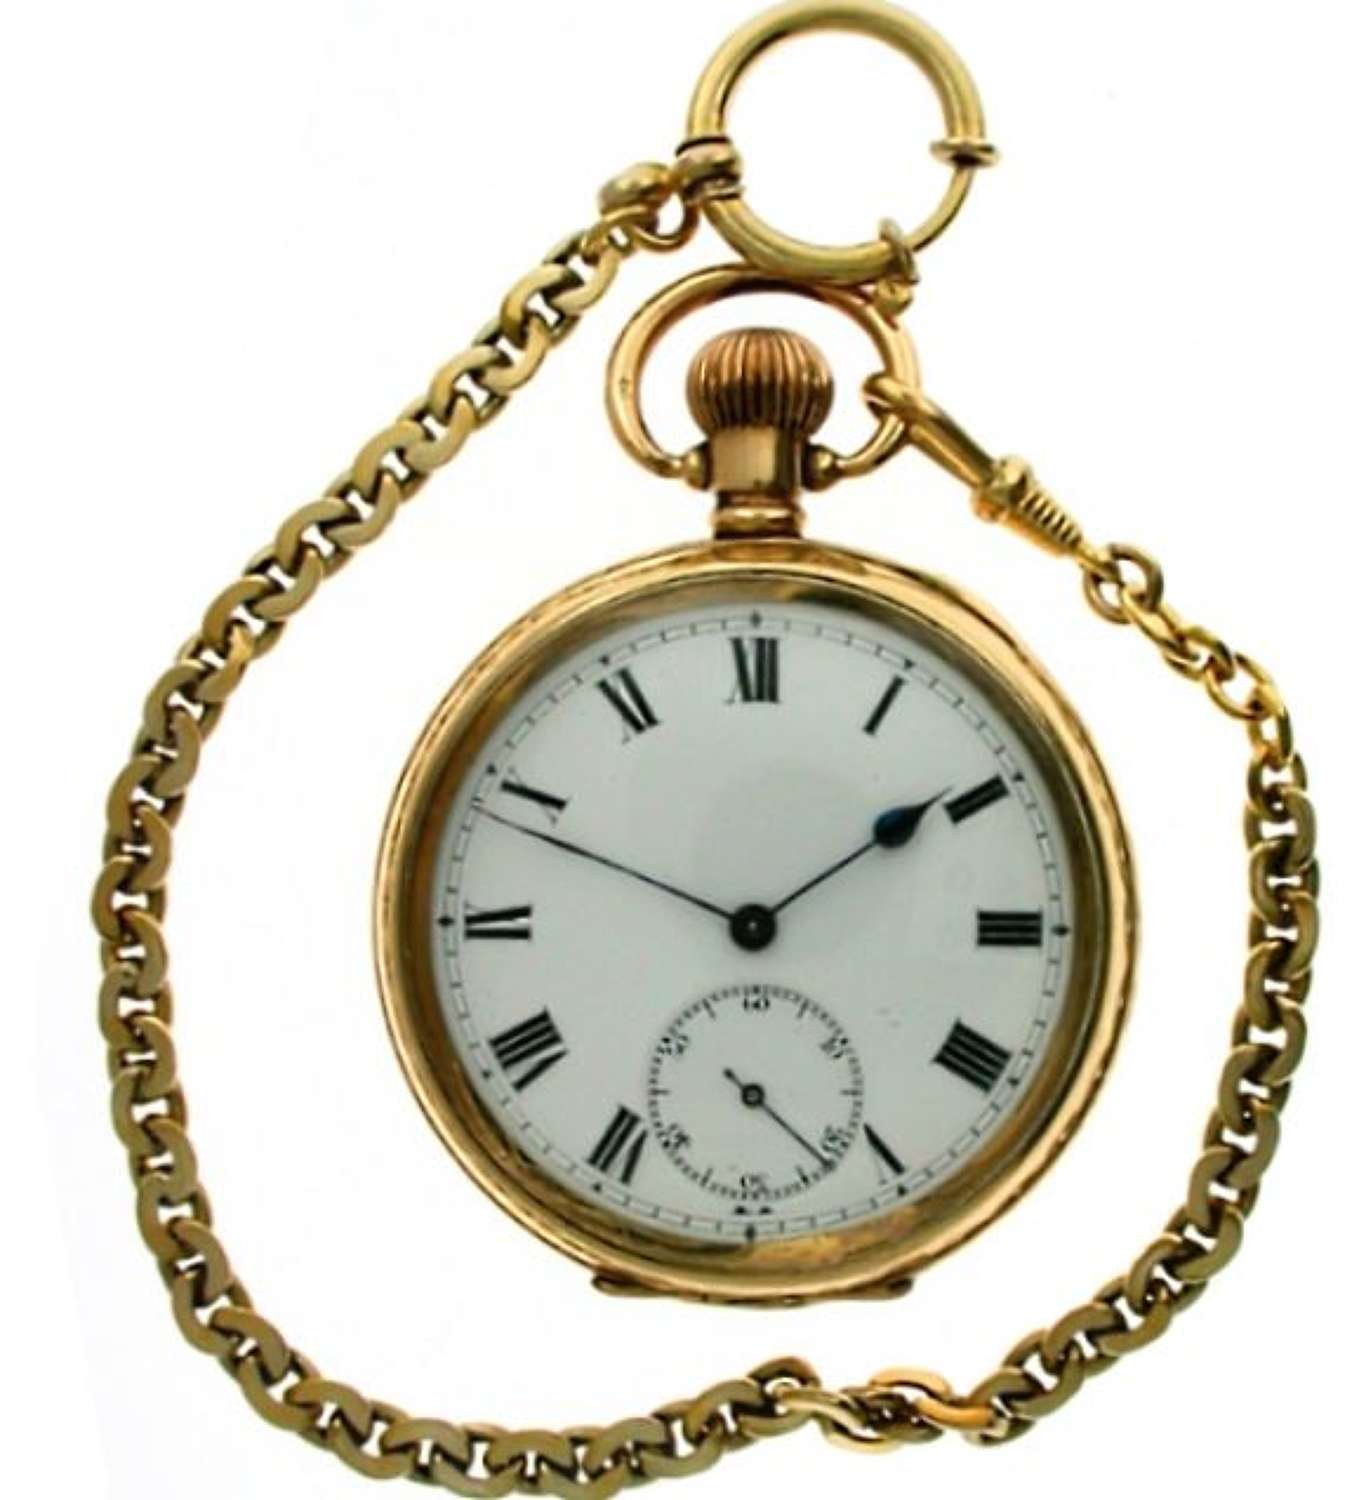 Mint Antique Gold-Filled Open Face Pocket Watch  with GF Chain